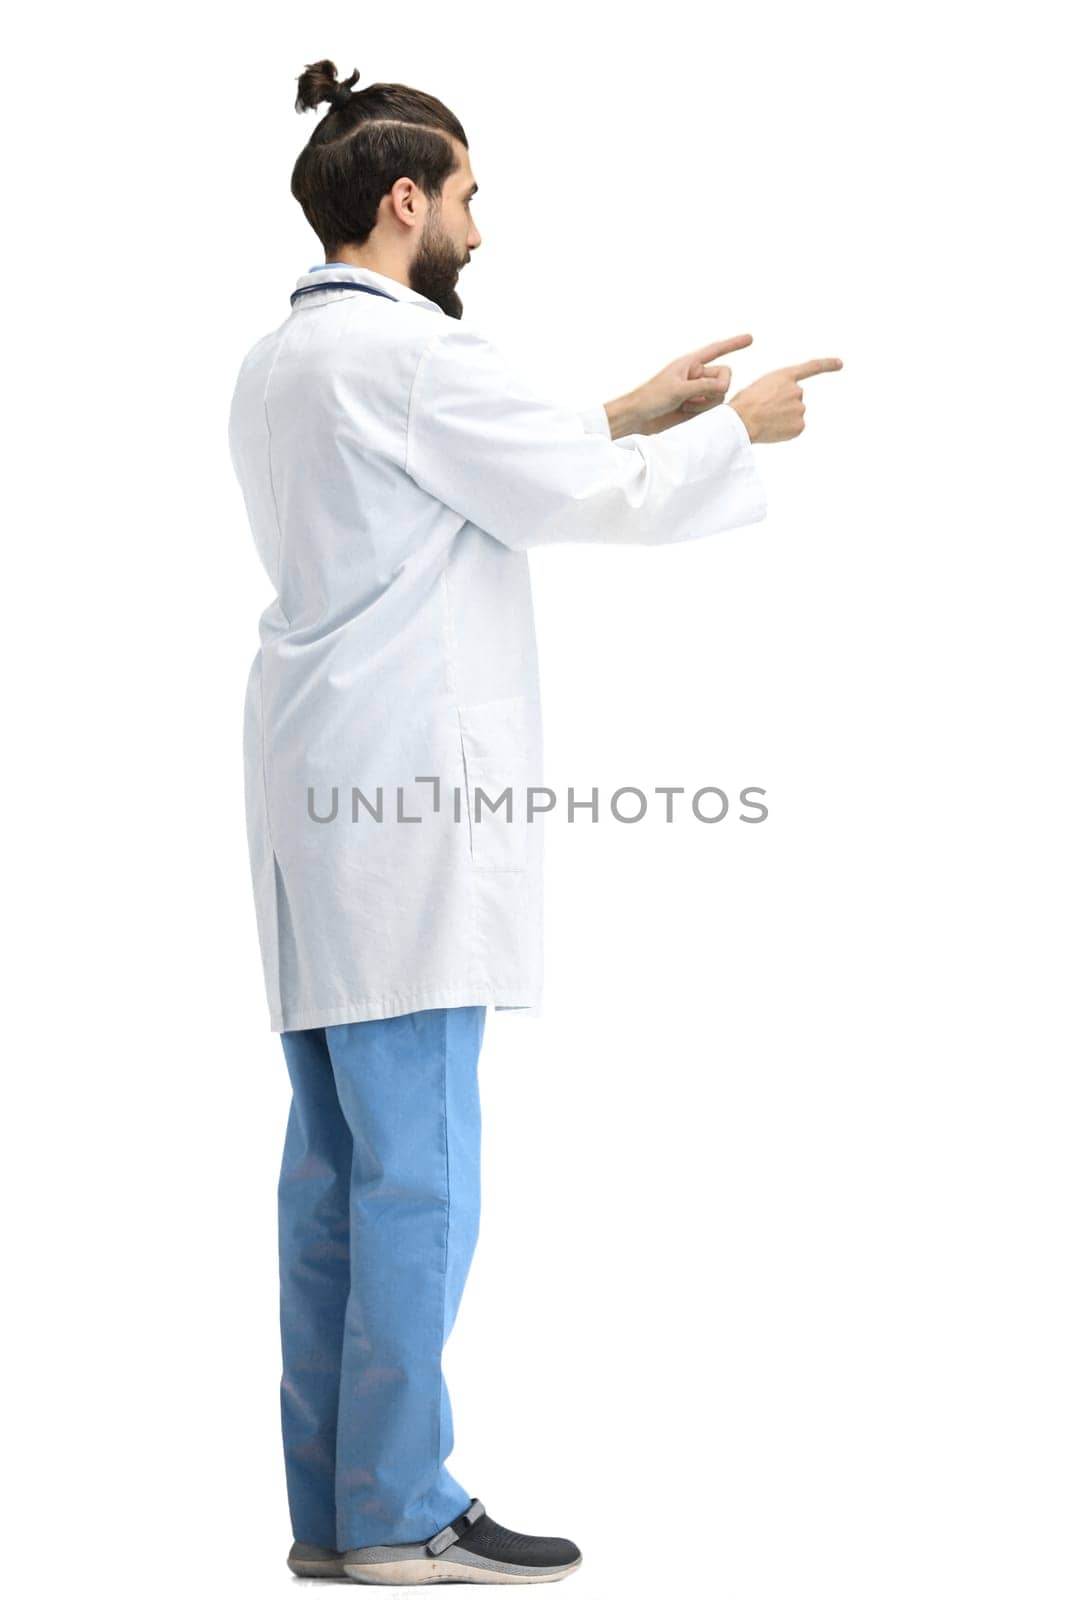 The male doctor, full-length, on a white background, points to the side.